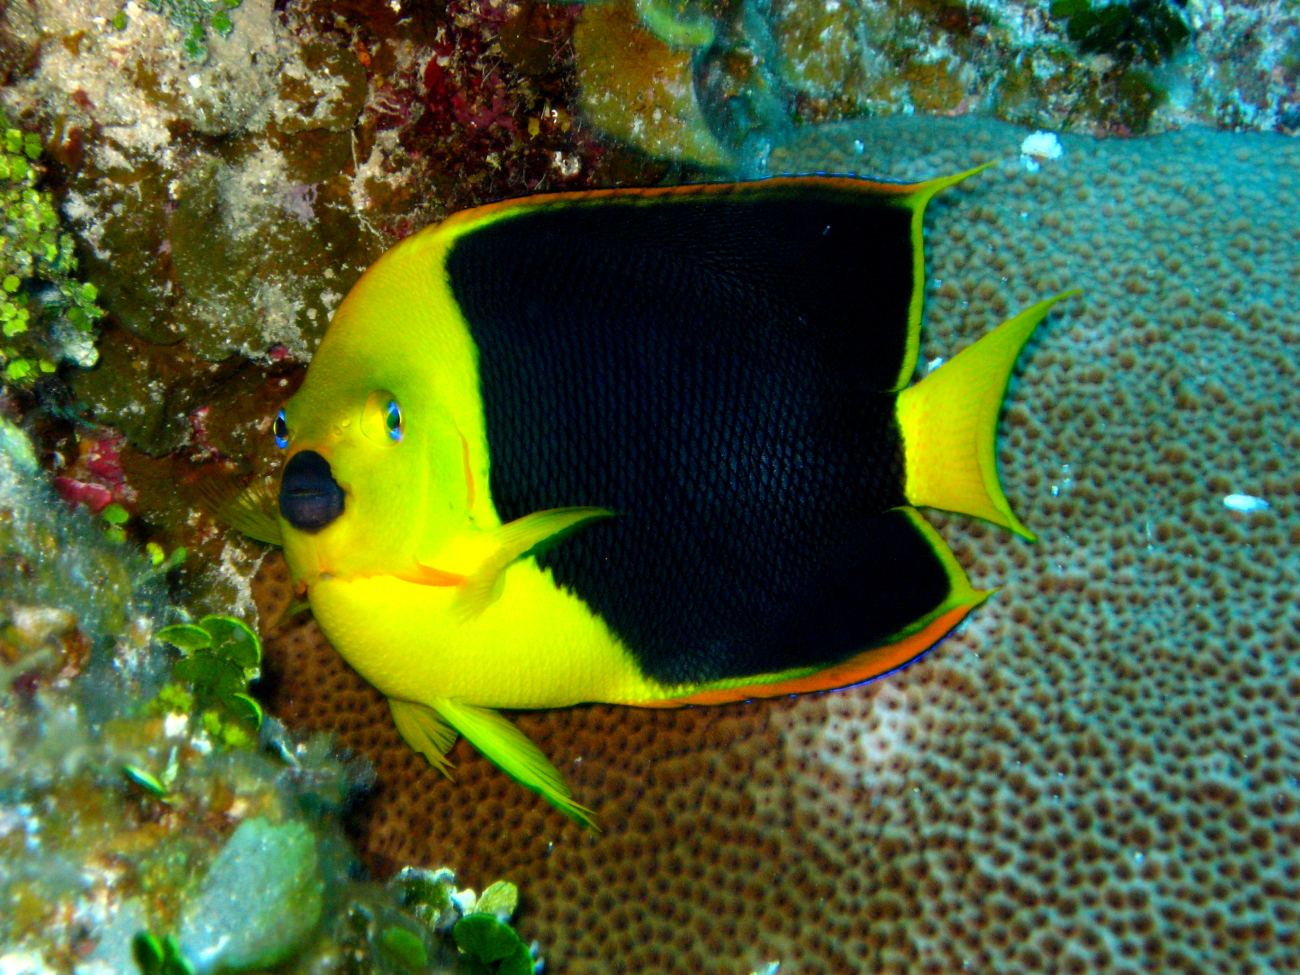 Rock beauty angelfish (Holocanthus tricolor)